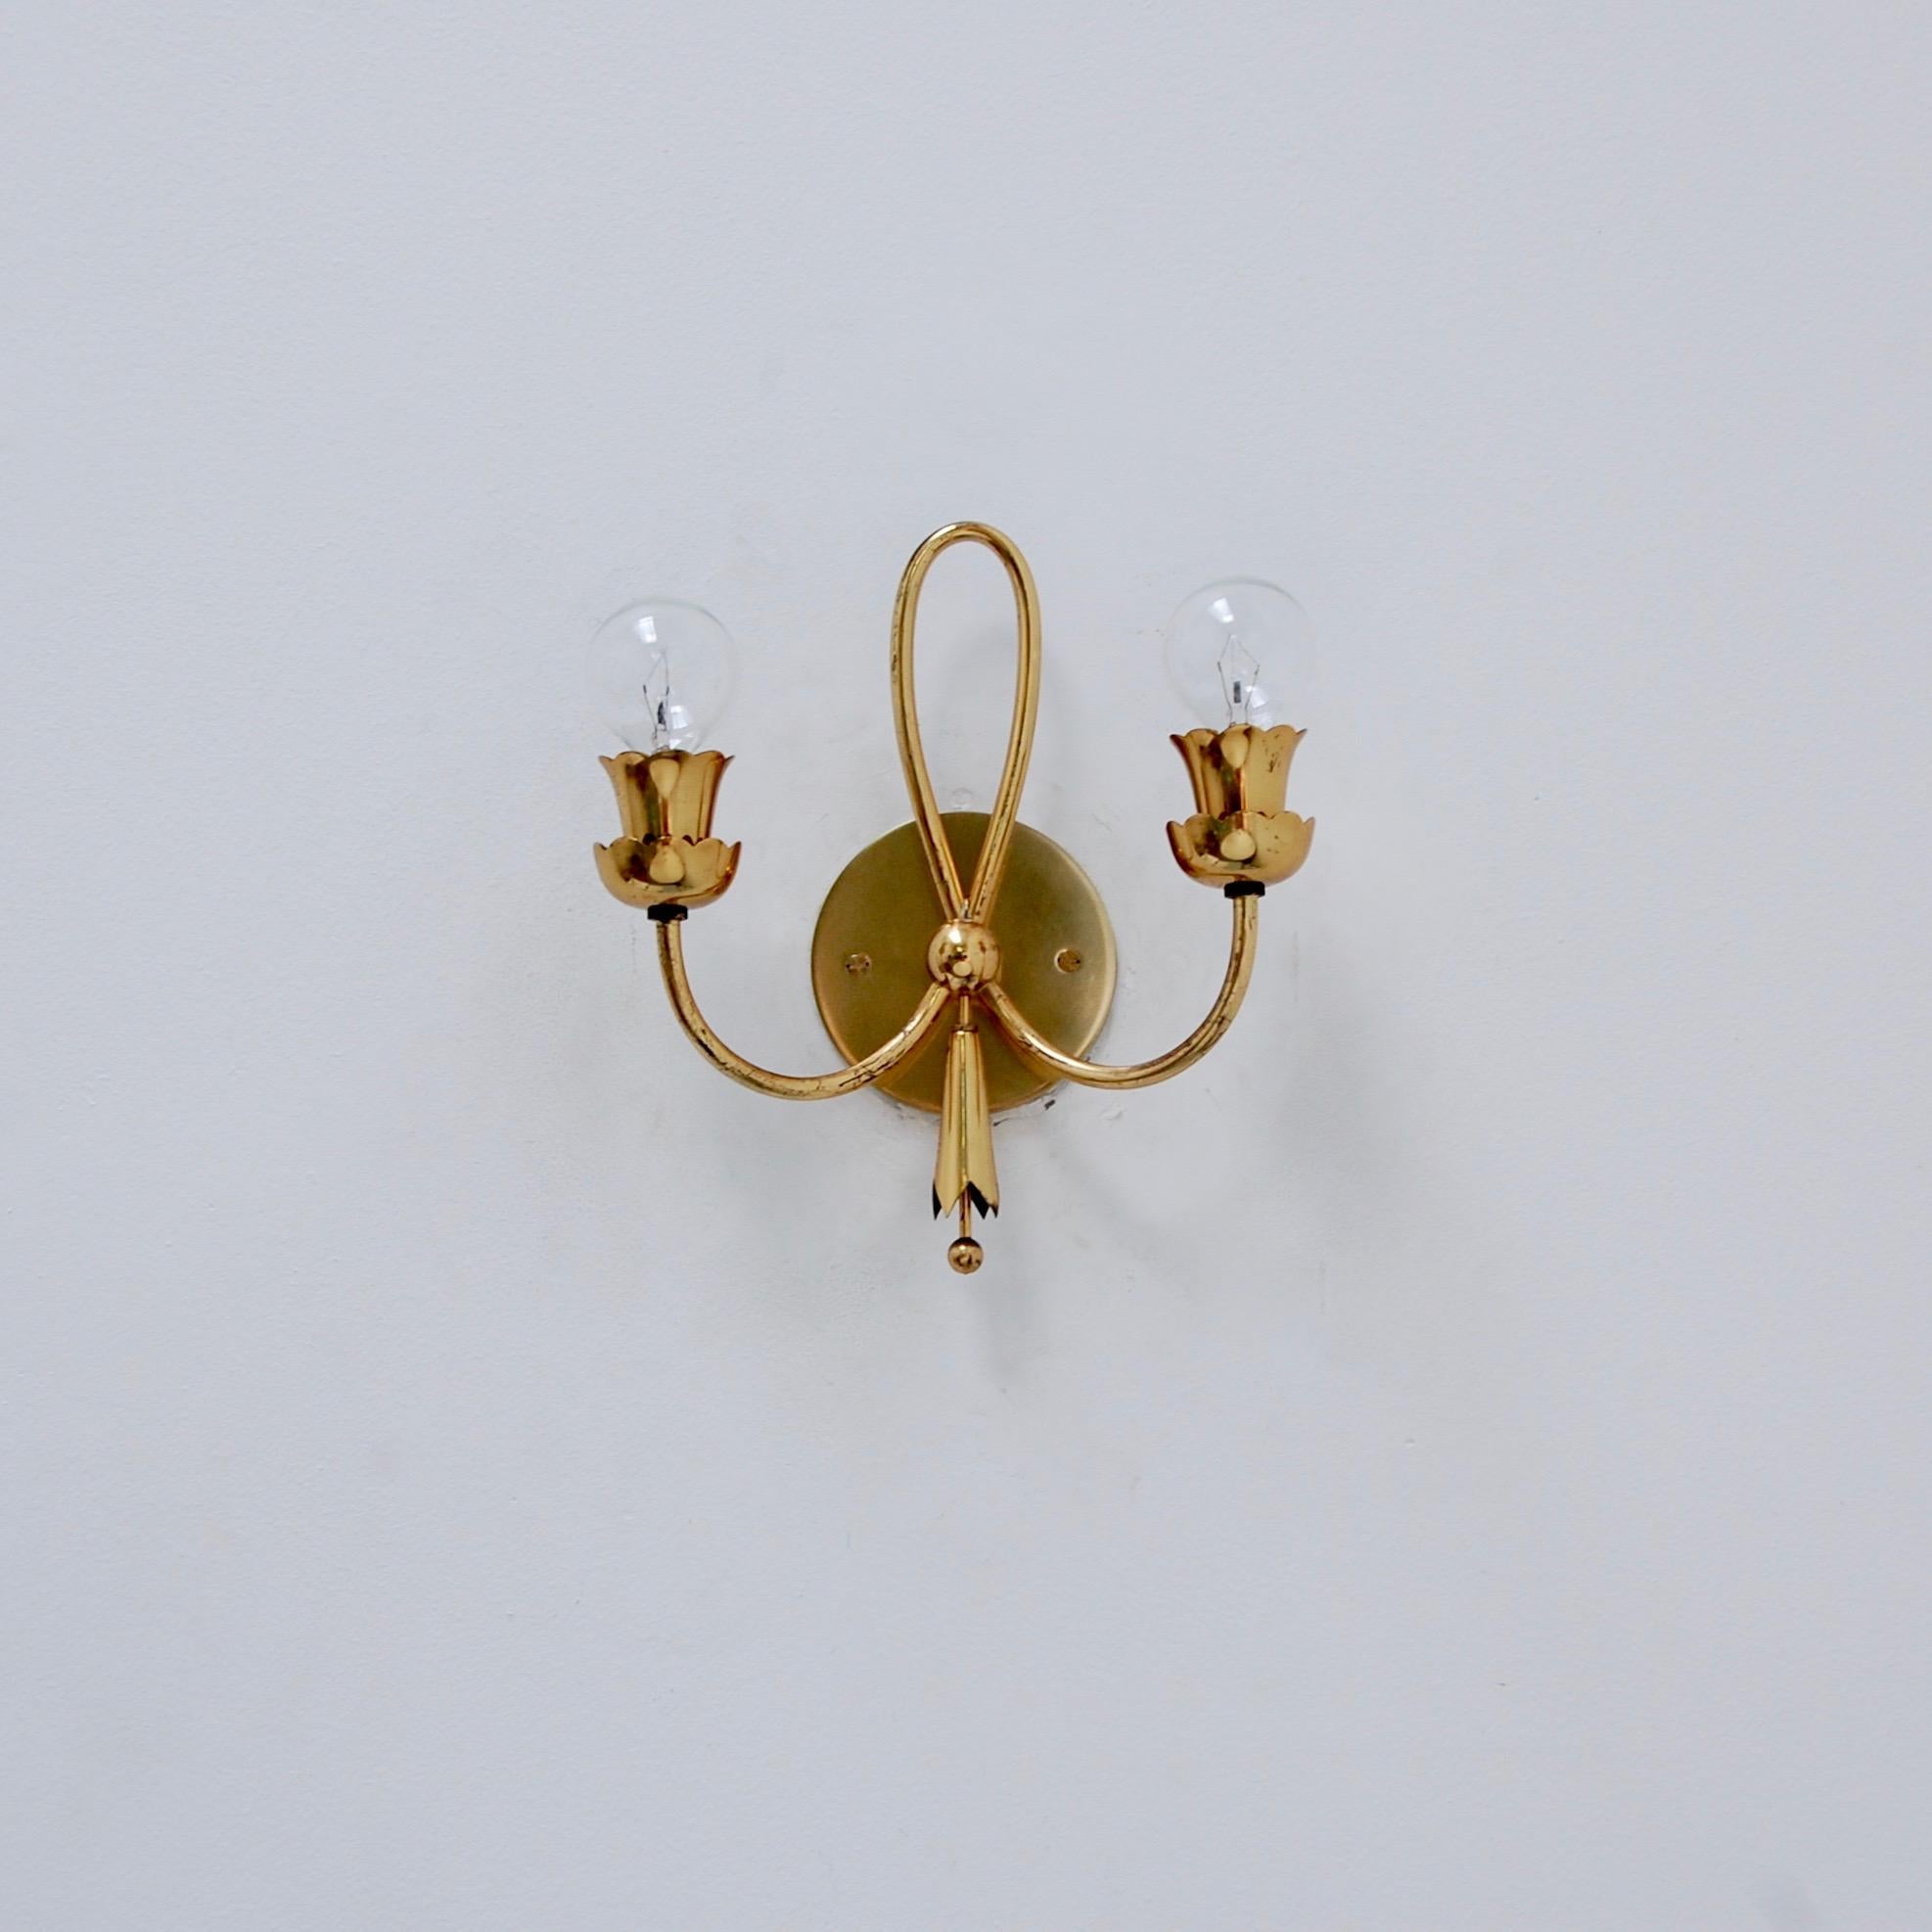 Iconic late 1940s Italian brass sconces in a botanical motif. (2) candelabra based sockets per sconce. Partially restored, and rewired for use in the US. Light bulbs supplied with order. We can also rewire for any country upon request. Priced as a